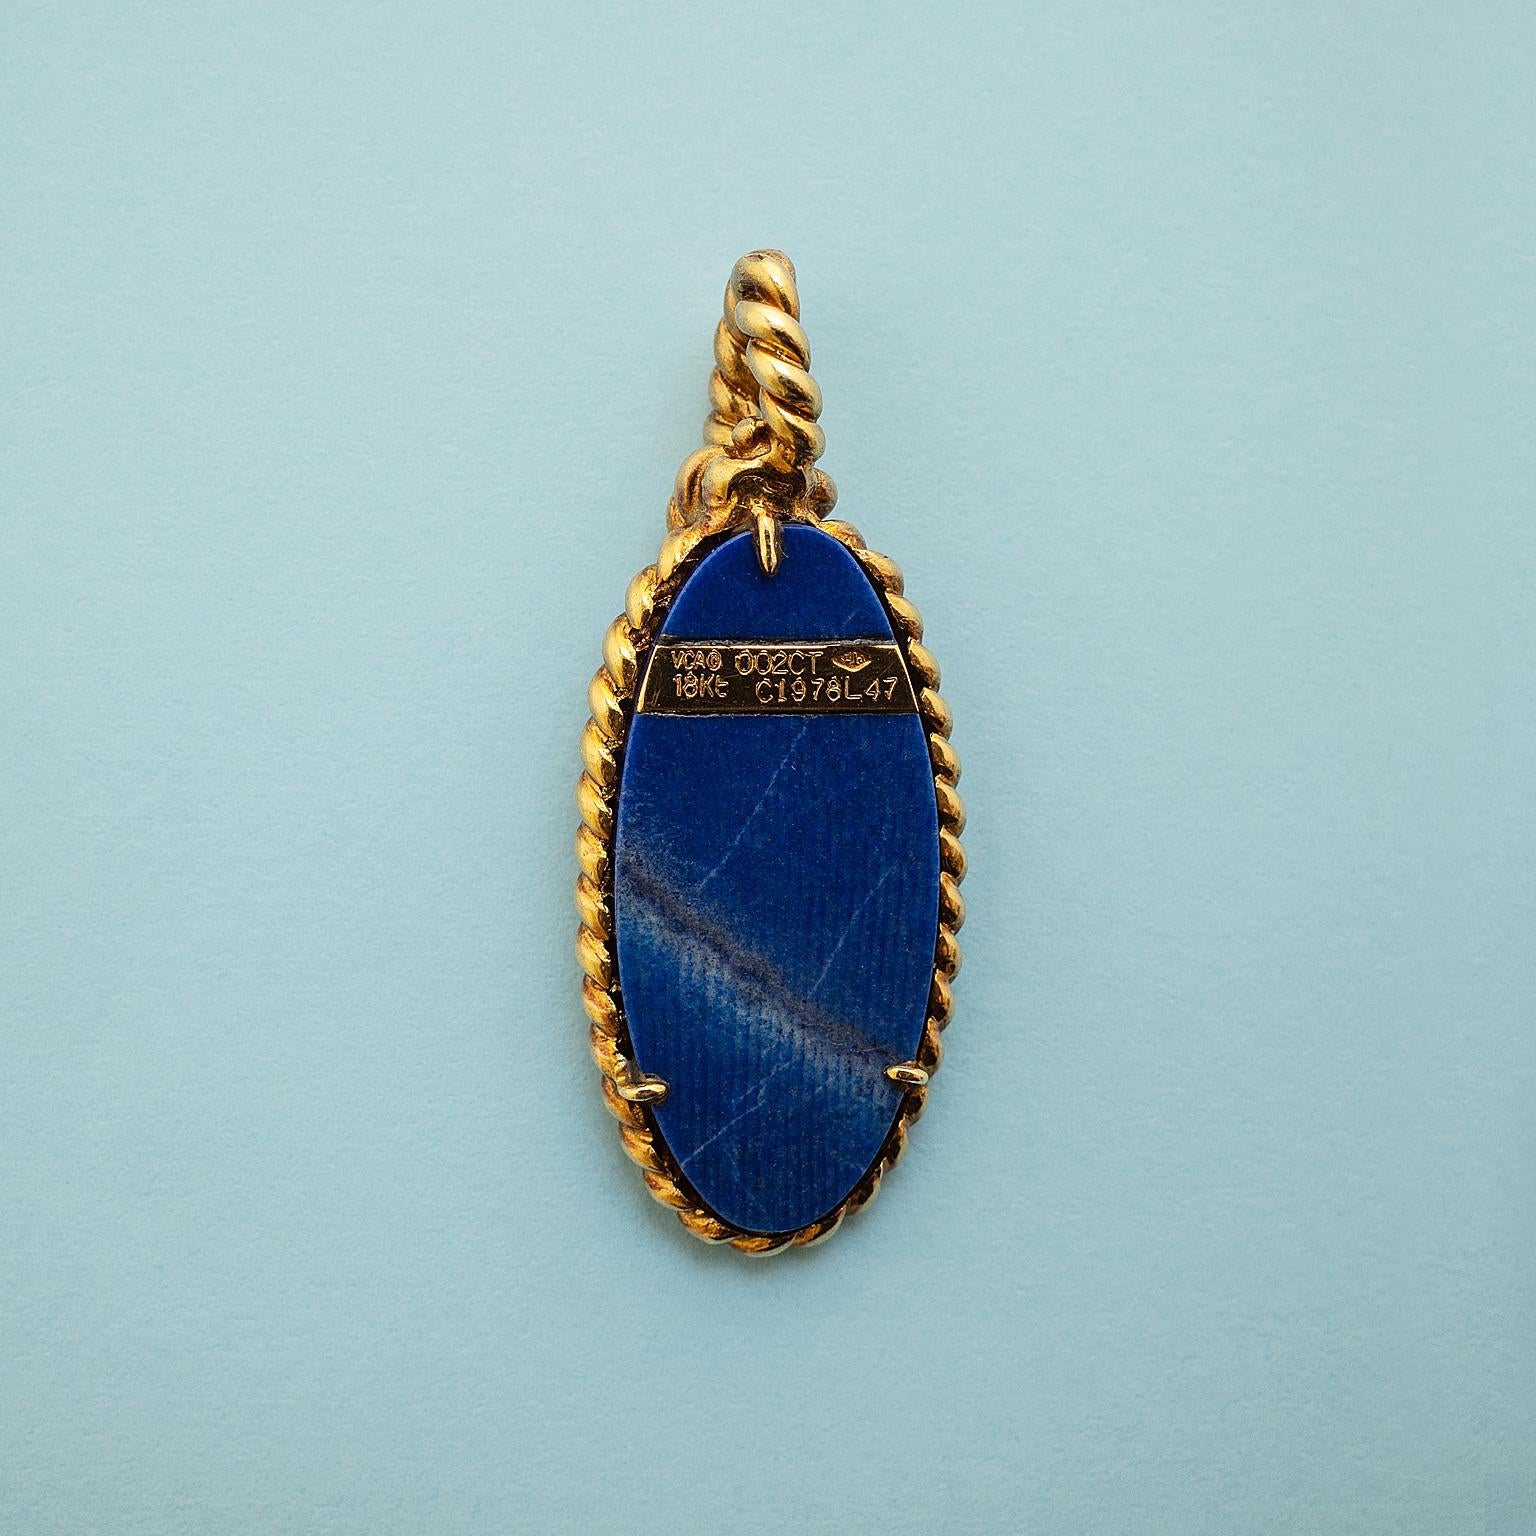 Brilliant Cut Van Cleef & Arpels 18k Gold Pendant with Sodalite and Diamond